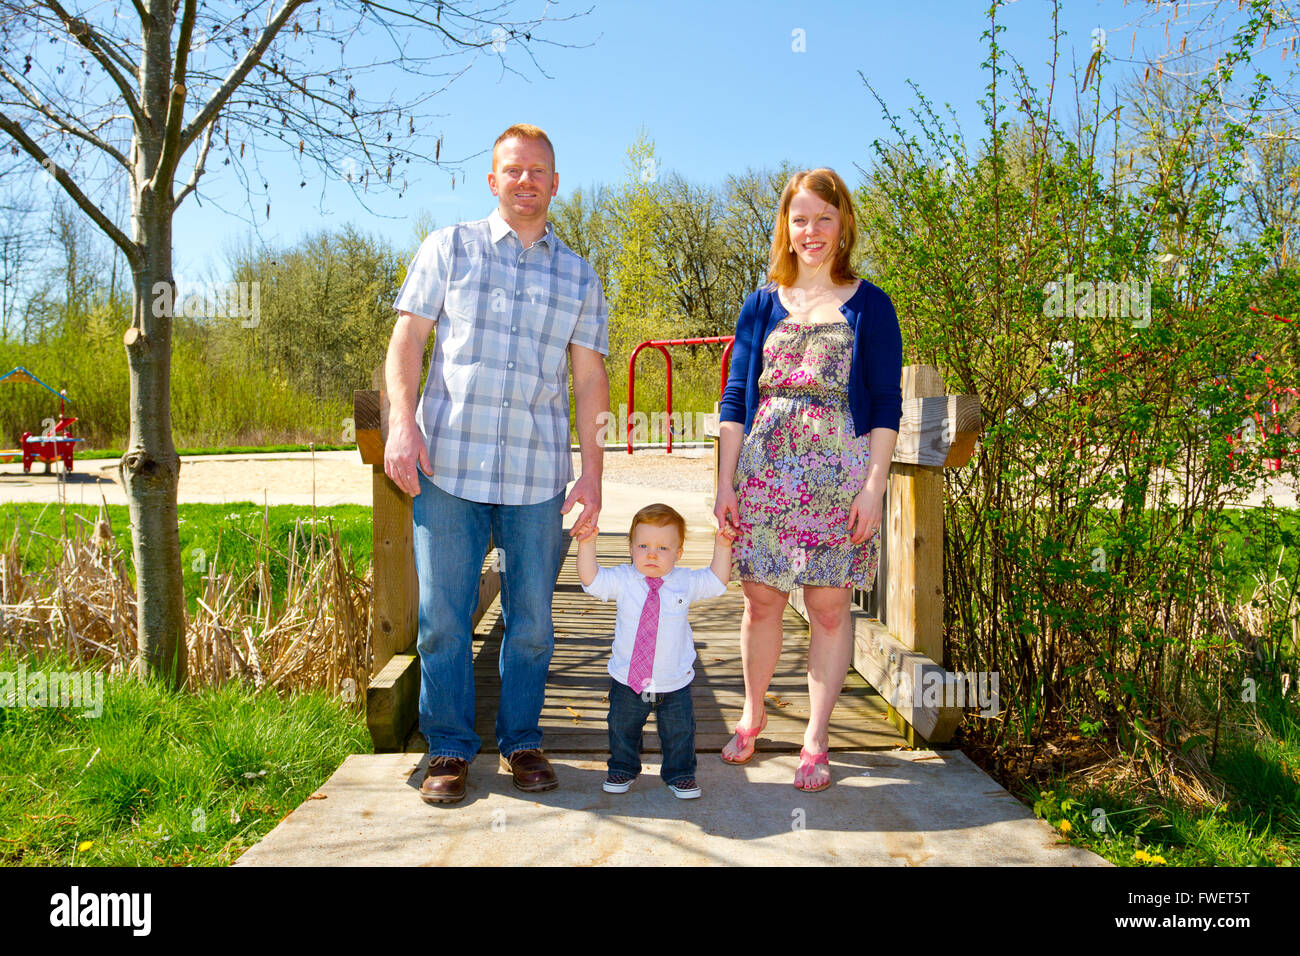 A man and a woman hold their baby one year old son while posing for a family photo outdoors. Stock Photo